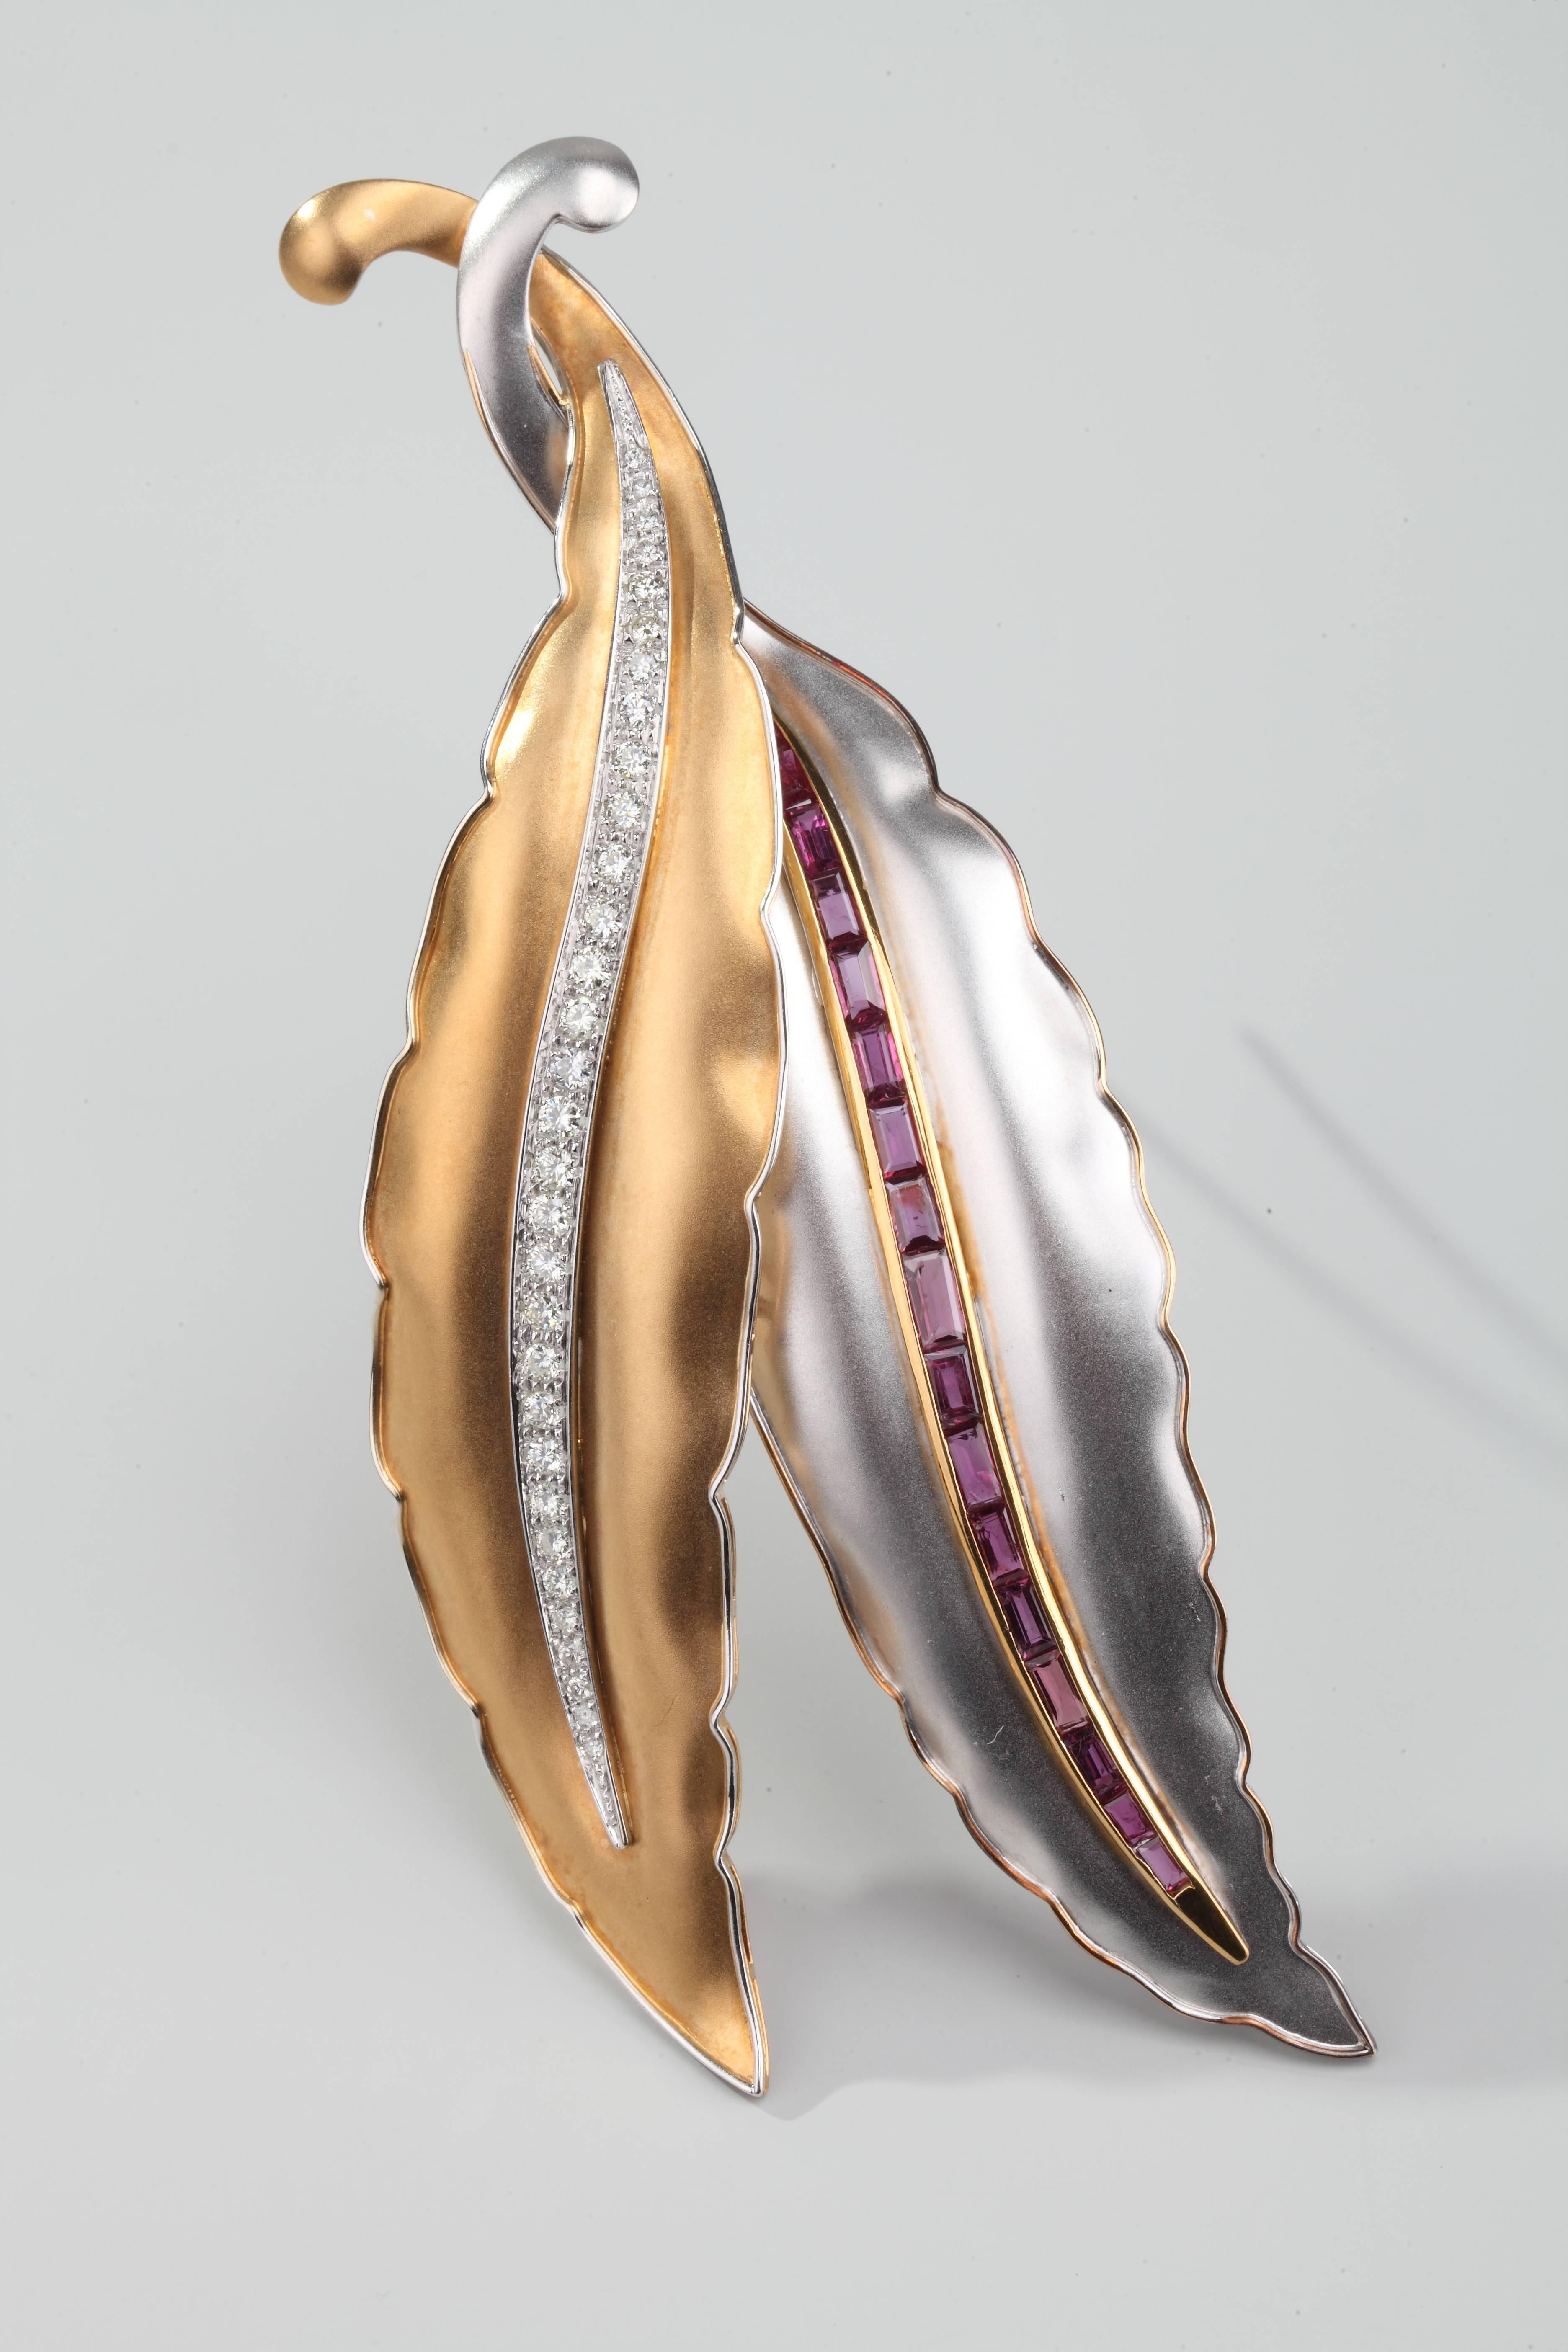 Brooch in the shape of two leaves, one in yellow sanded gold, one in white sanded gold, the ridge set, one with brillant cut diamonds, the other with baguette cut rubies.